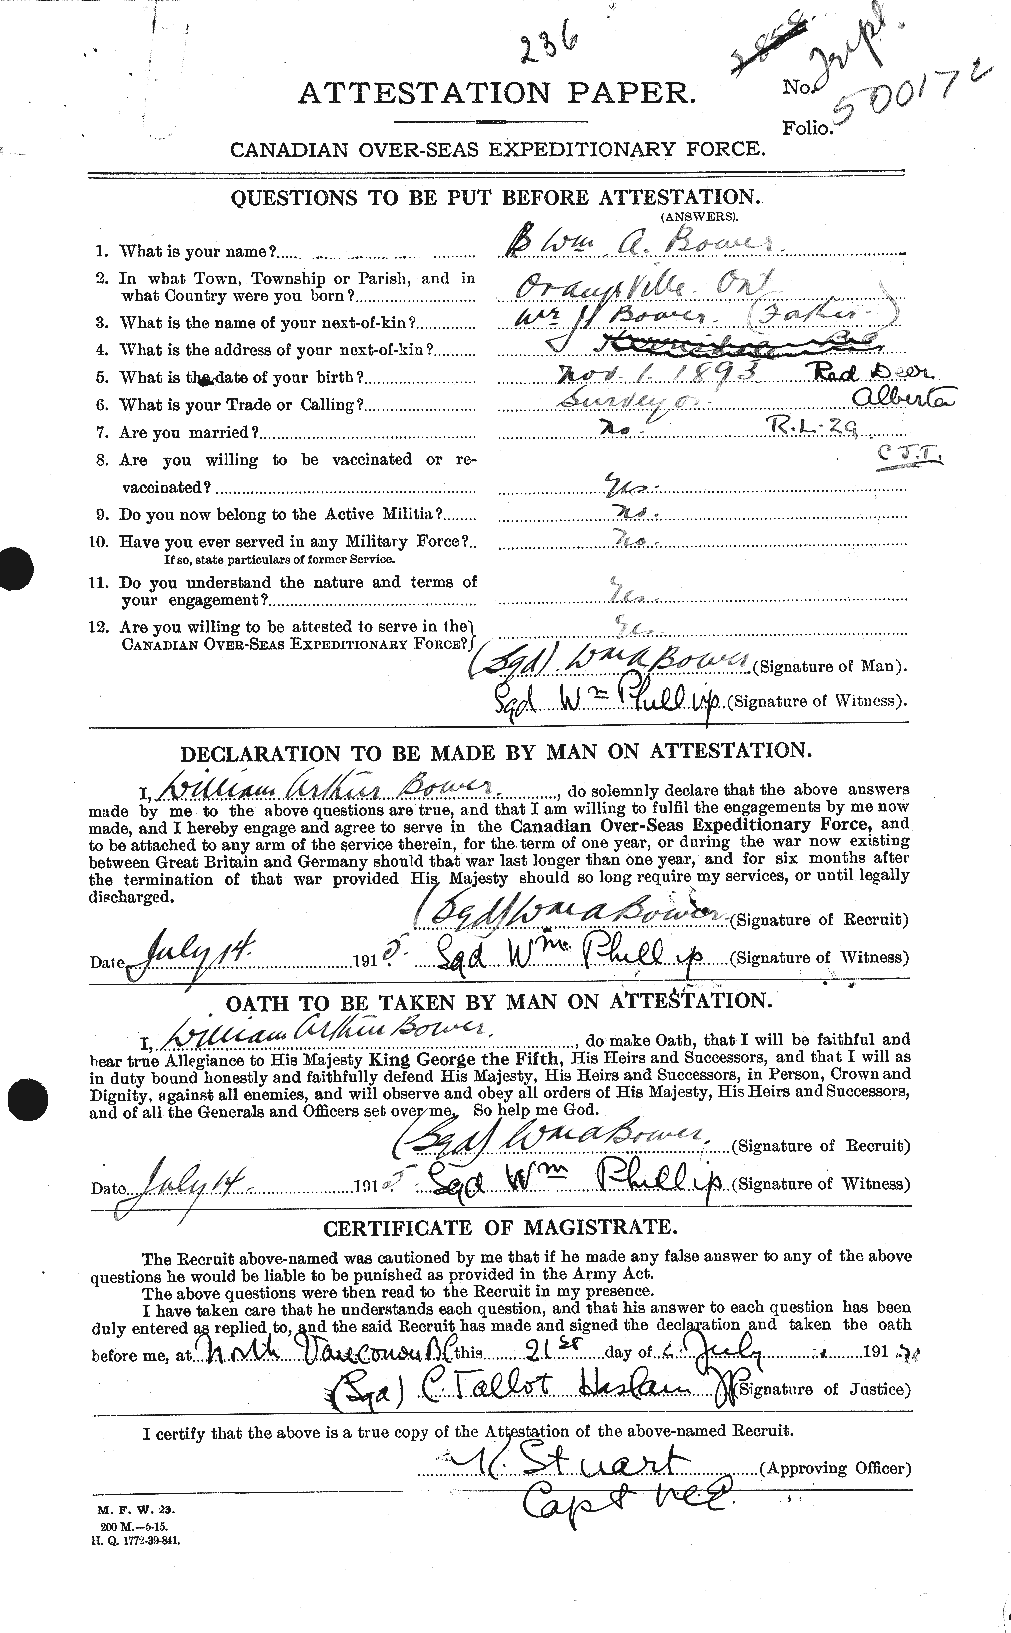 Personnel Records of the First World War - CEF 200235a